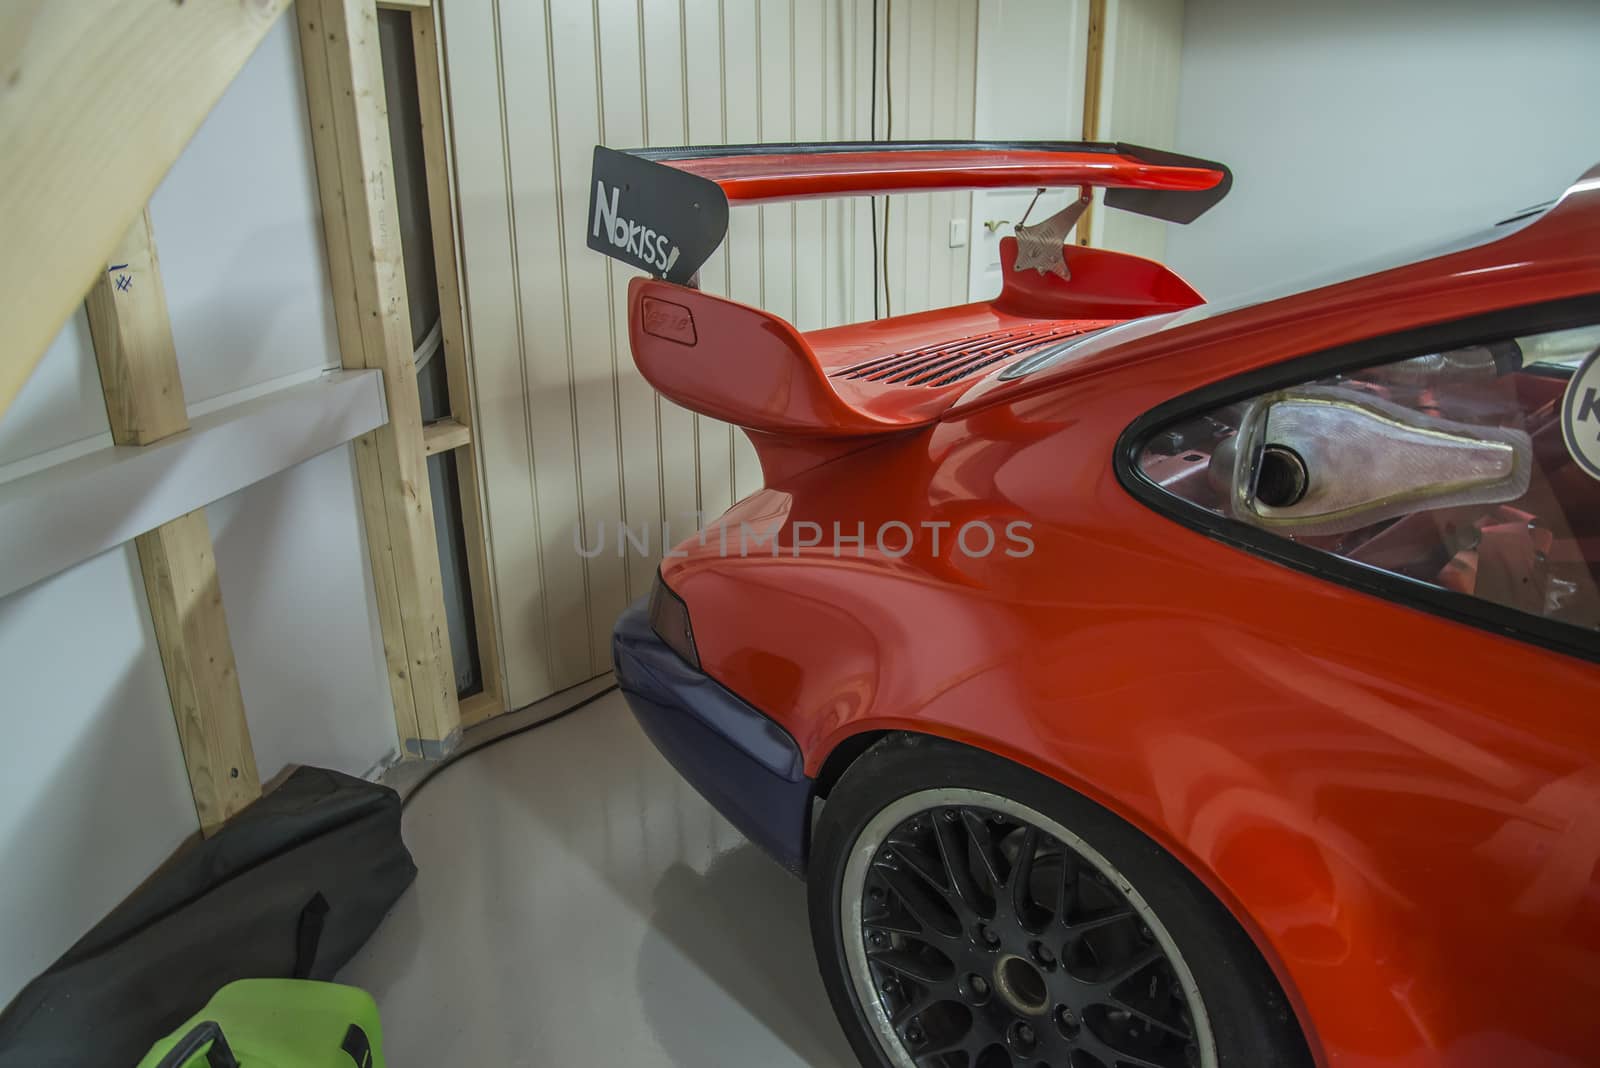 race cars in a garage by steirus